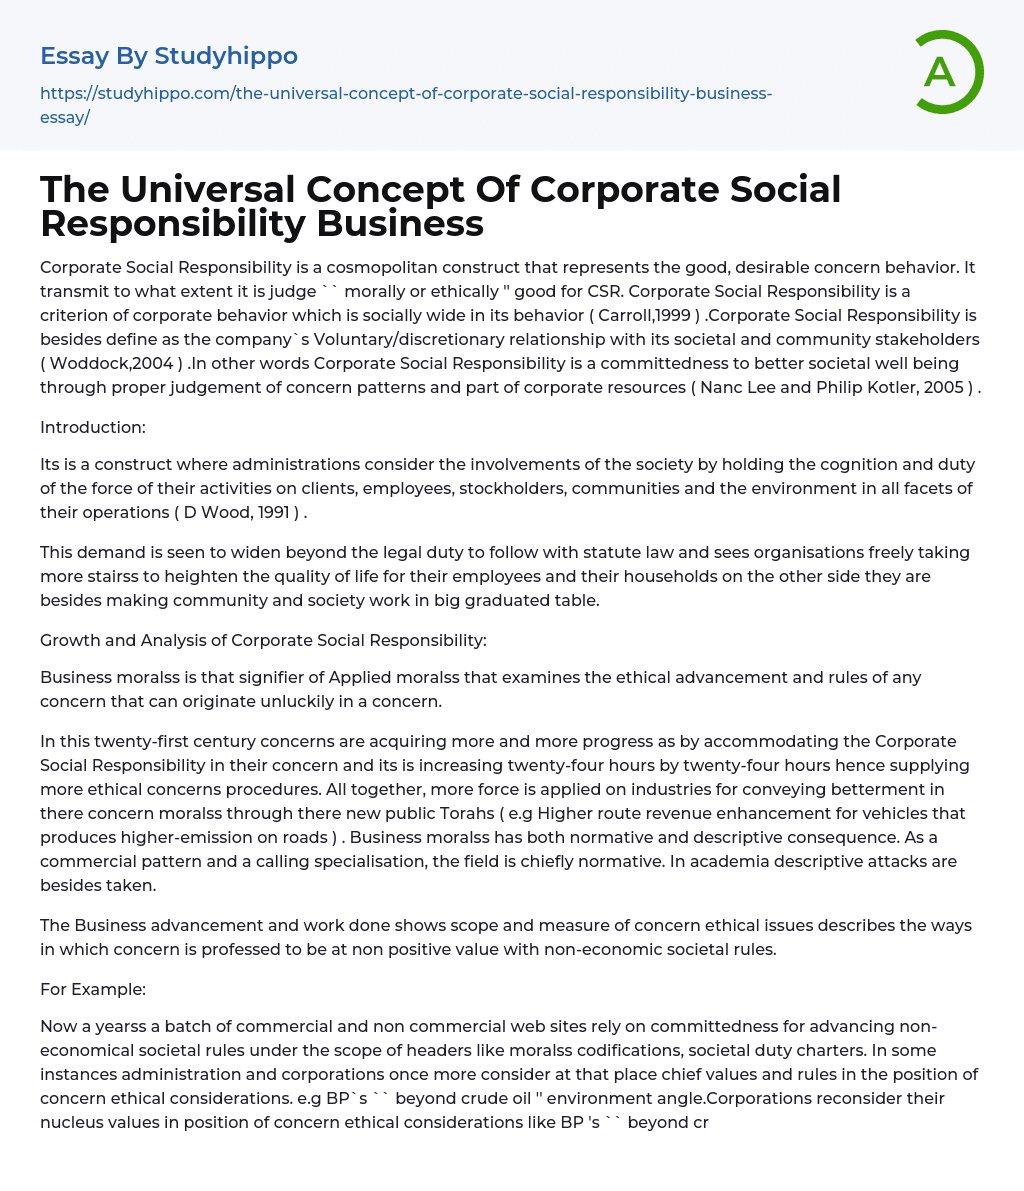 The Universal Concept Of Corporate Social Responsibility Business Essay Example